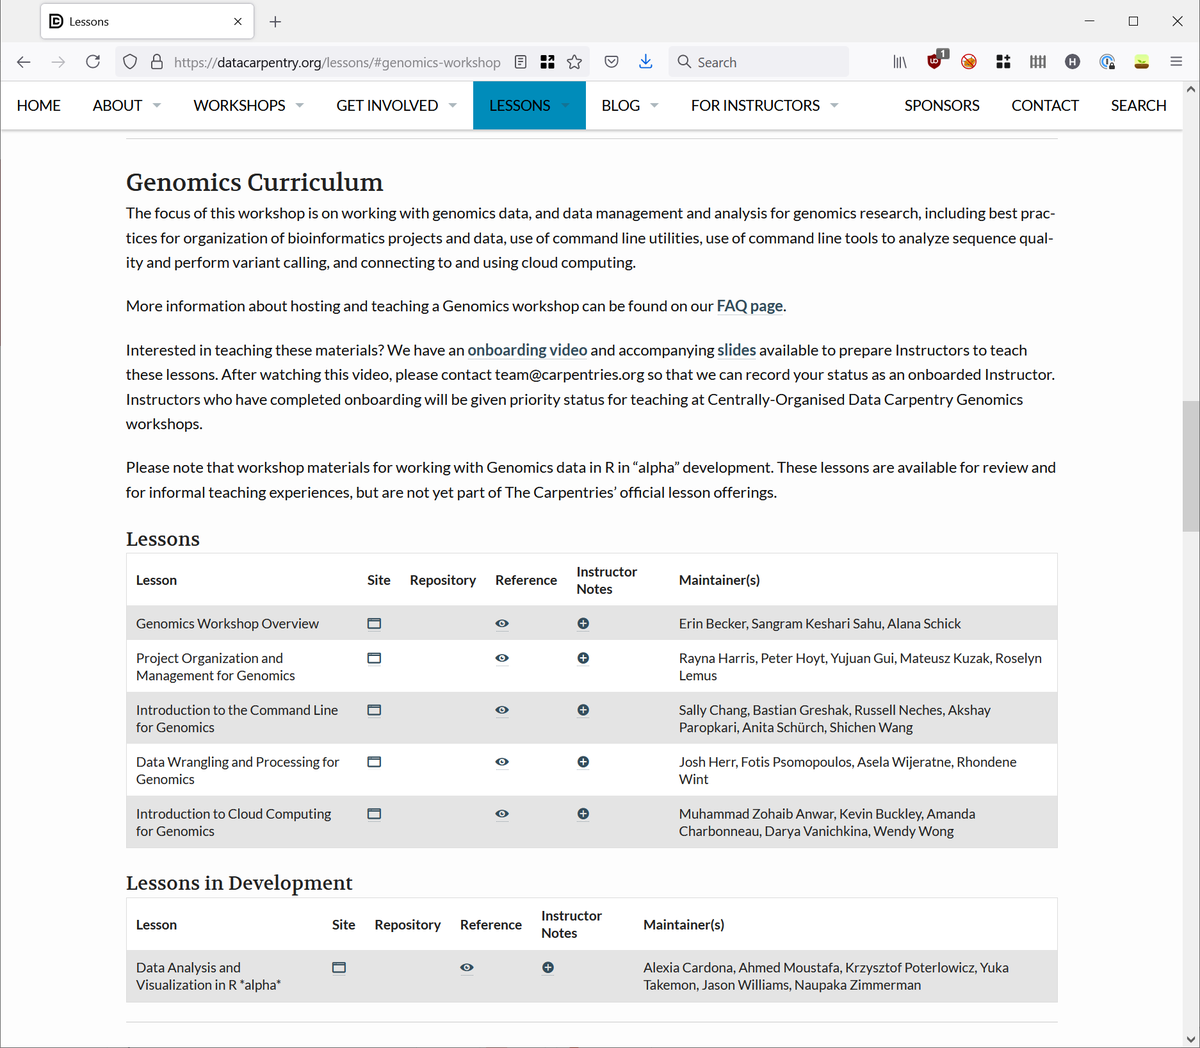 8/ @datacarpentry workshops teach you how to organize, manage, and analyze data, helpfully focused on applications to particular domains like genomics.